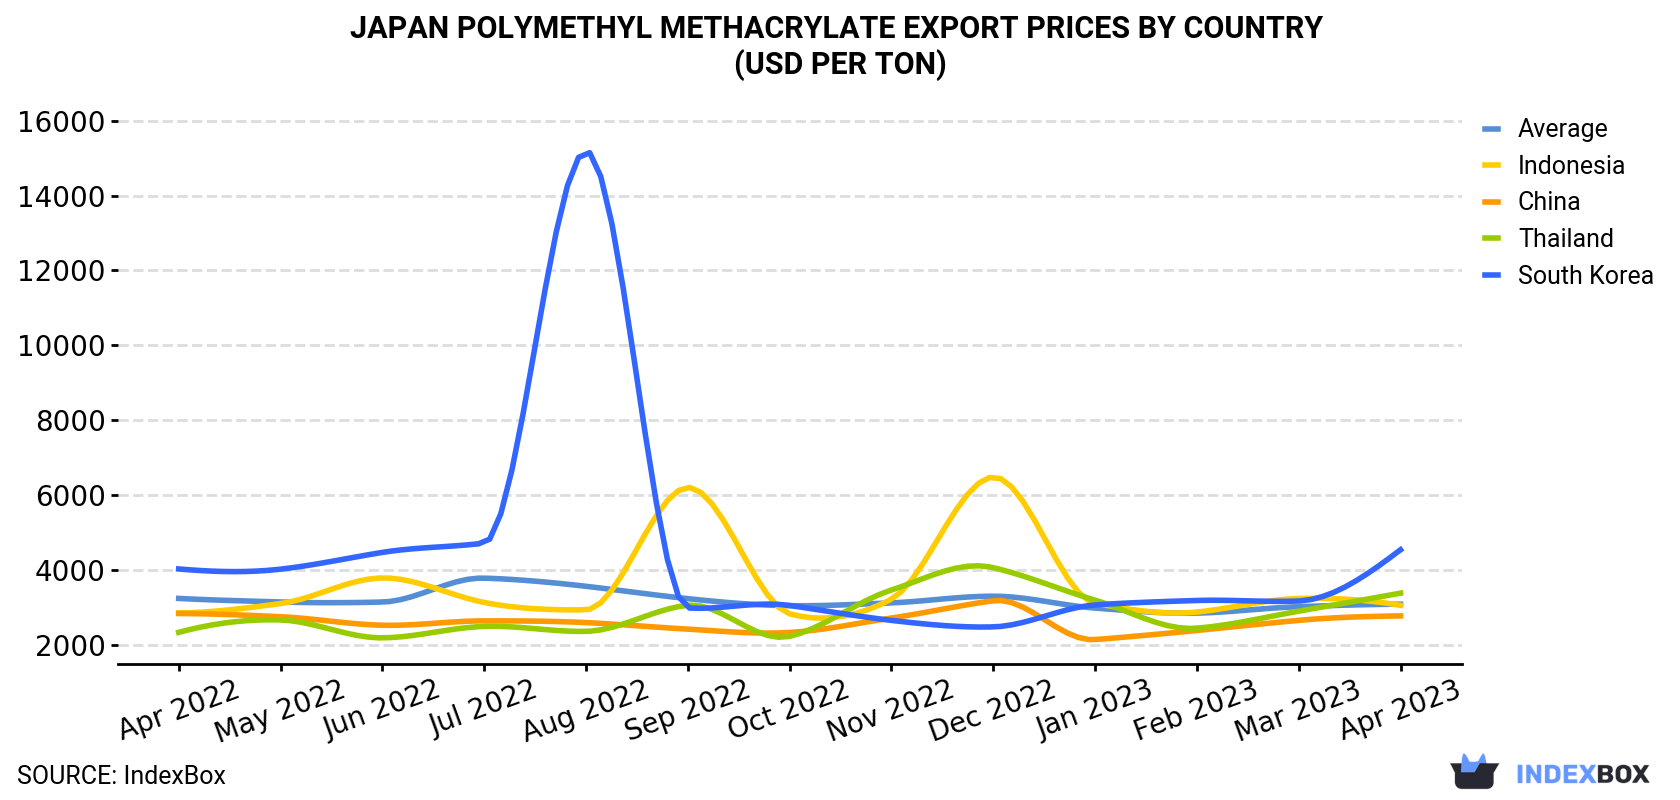 Japan Polymethyl Methacrylate Export Prices By Country (USD Per Ton)